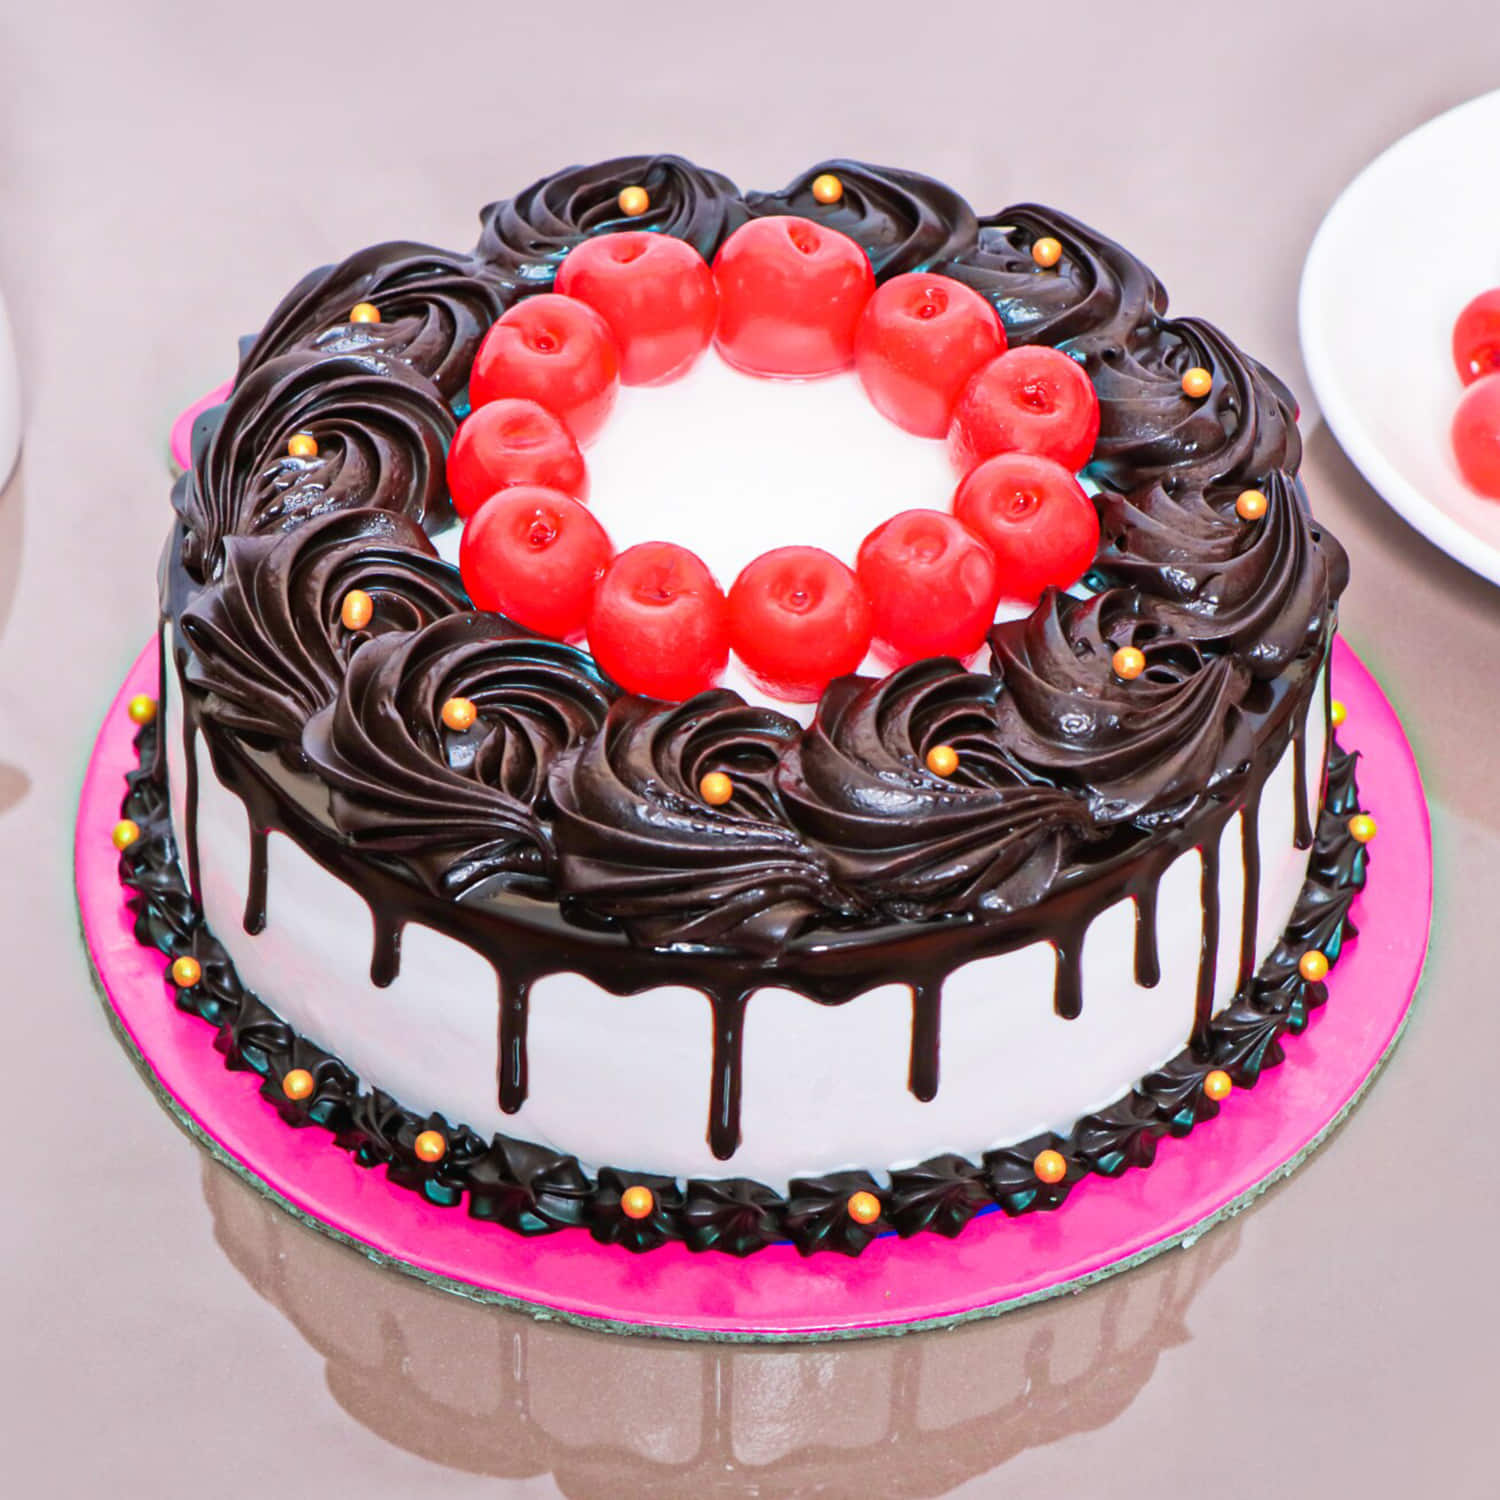 How to make a delicious and romantic anniversary cake for your girlfriend -  CakeZone Blog